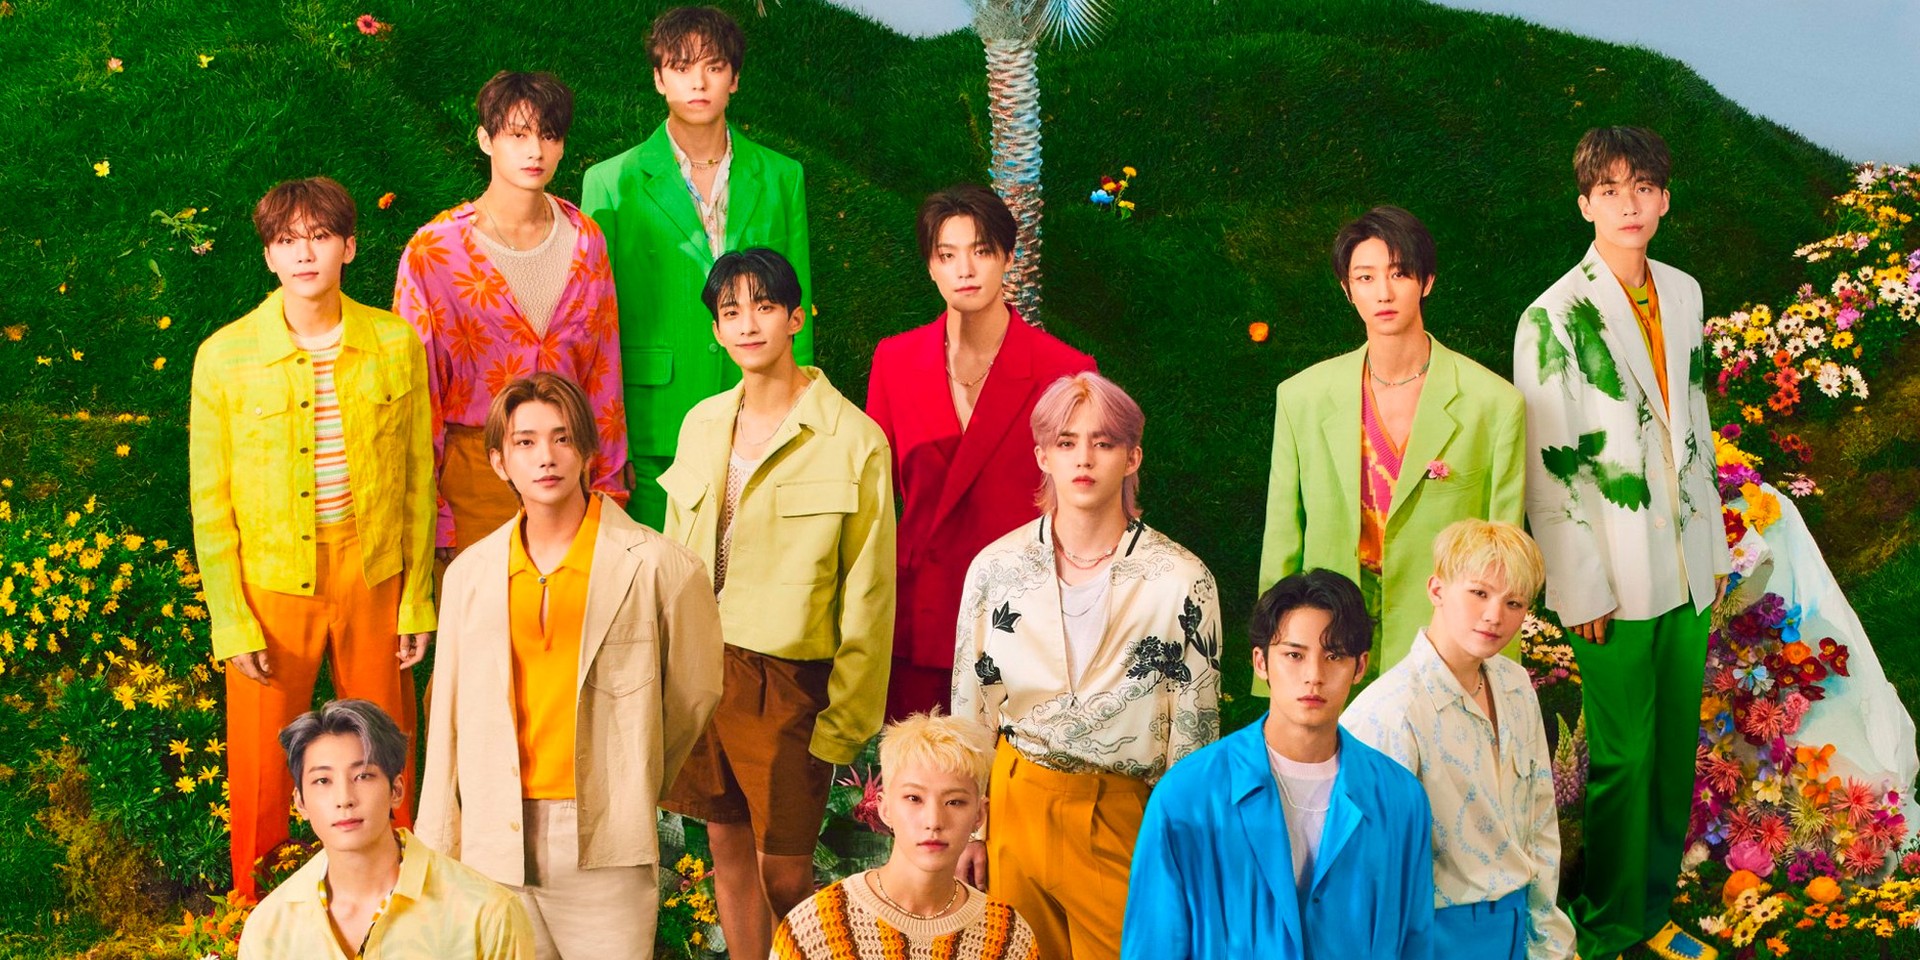 Here's everything you need to know about SEVENTEEN's concert in Manila